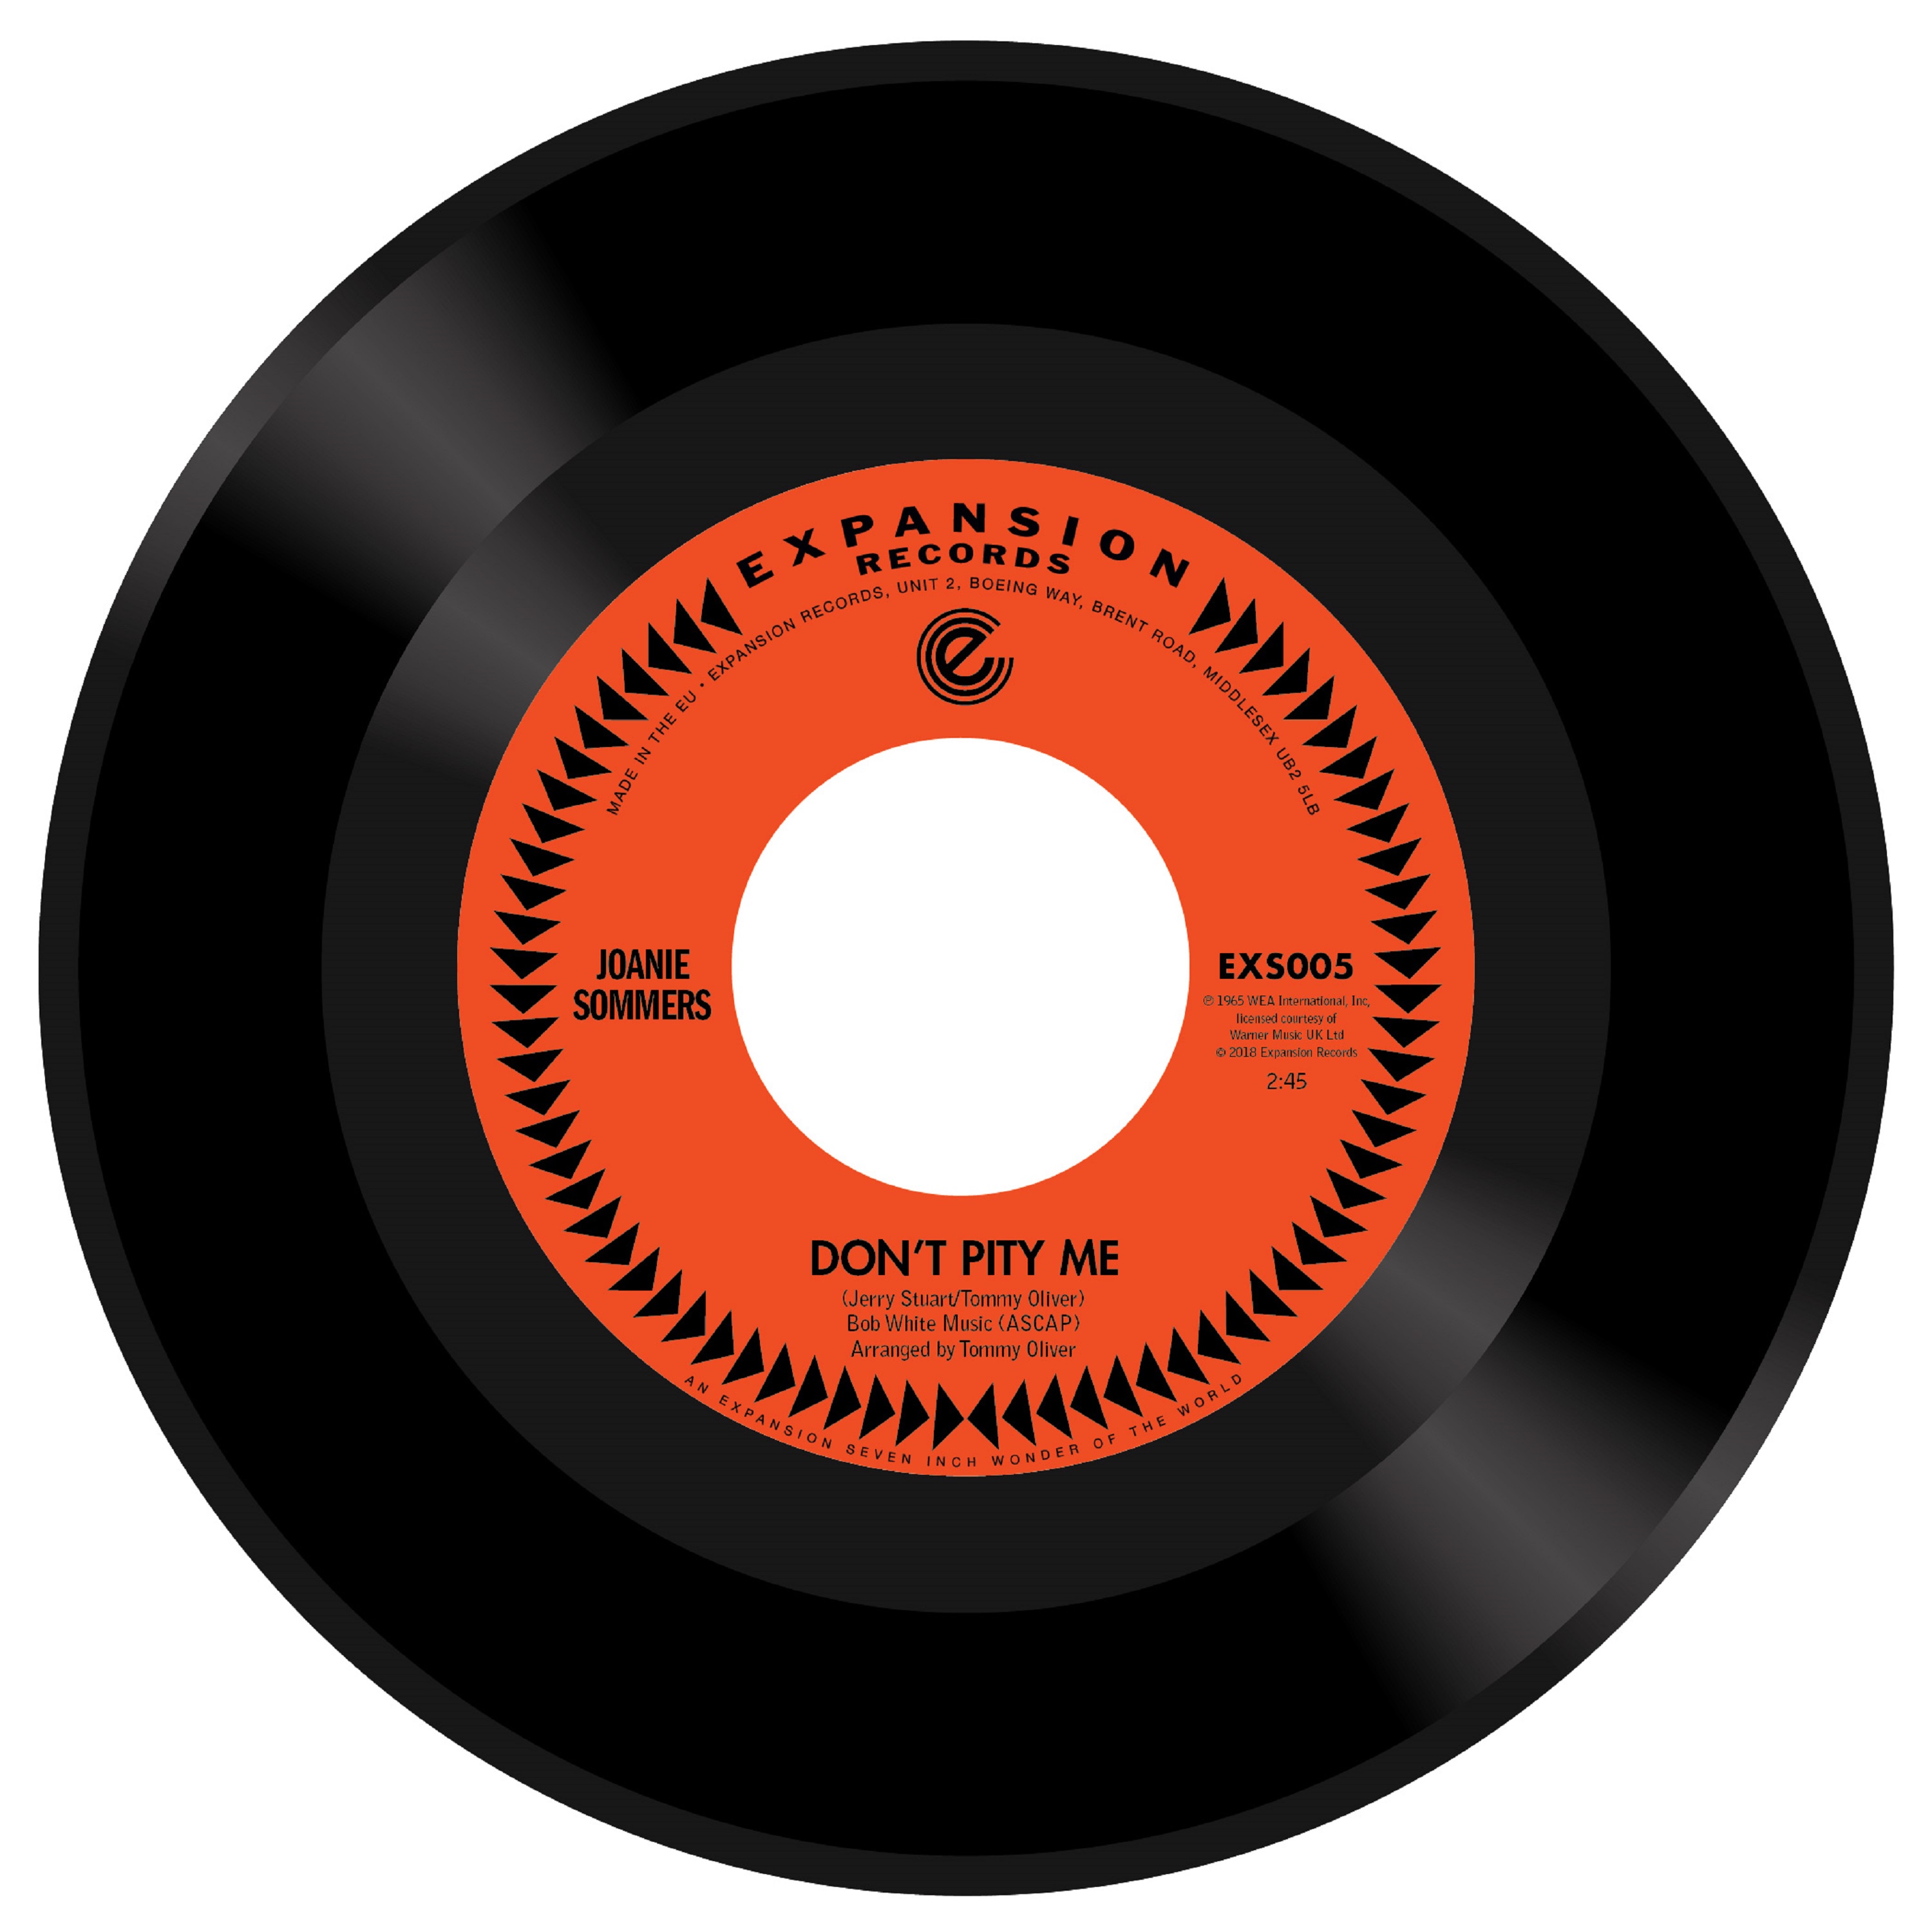 Joanie Sommers/DON'T PITY ME 7"